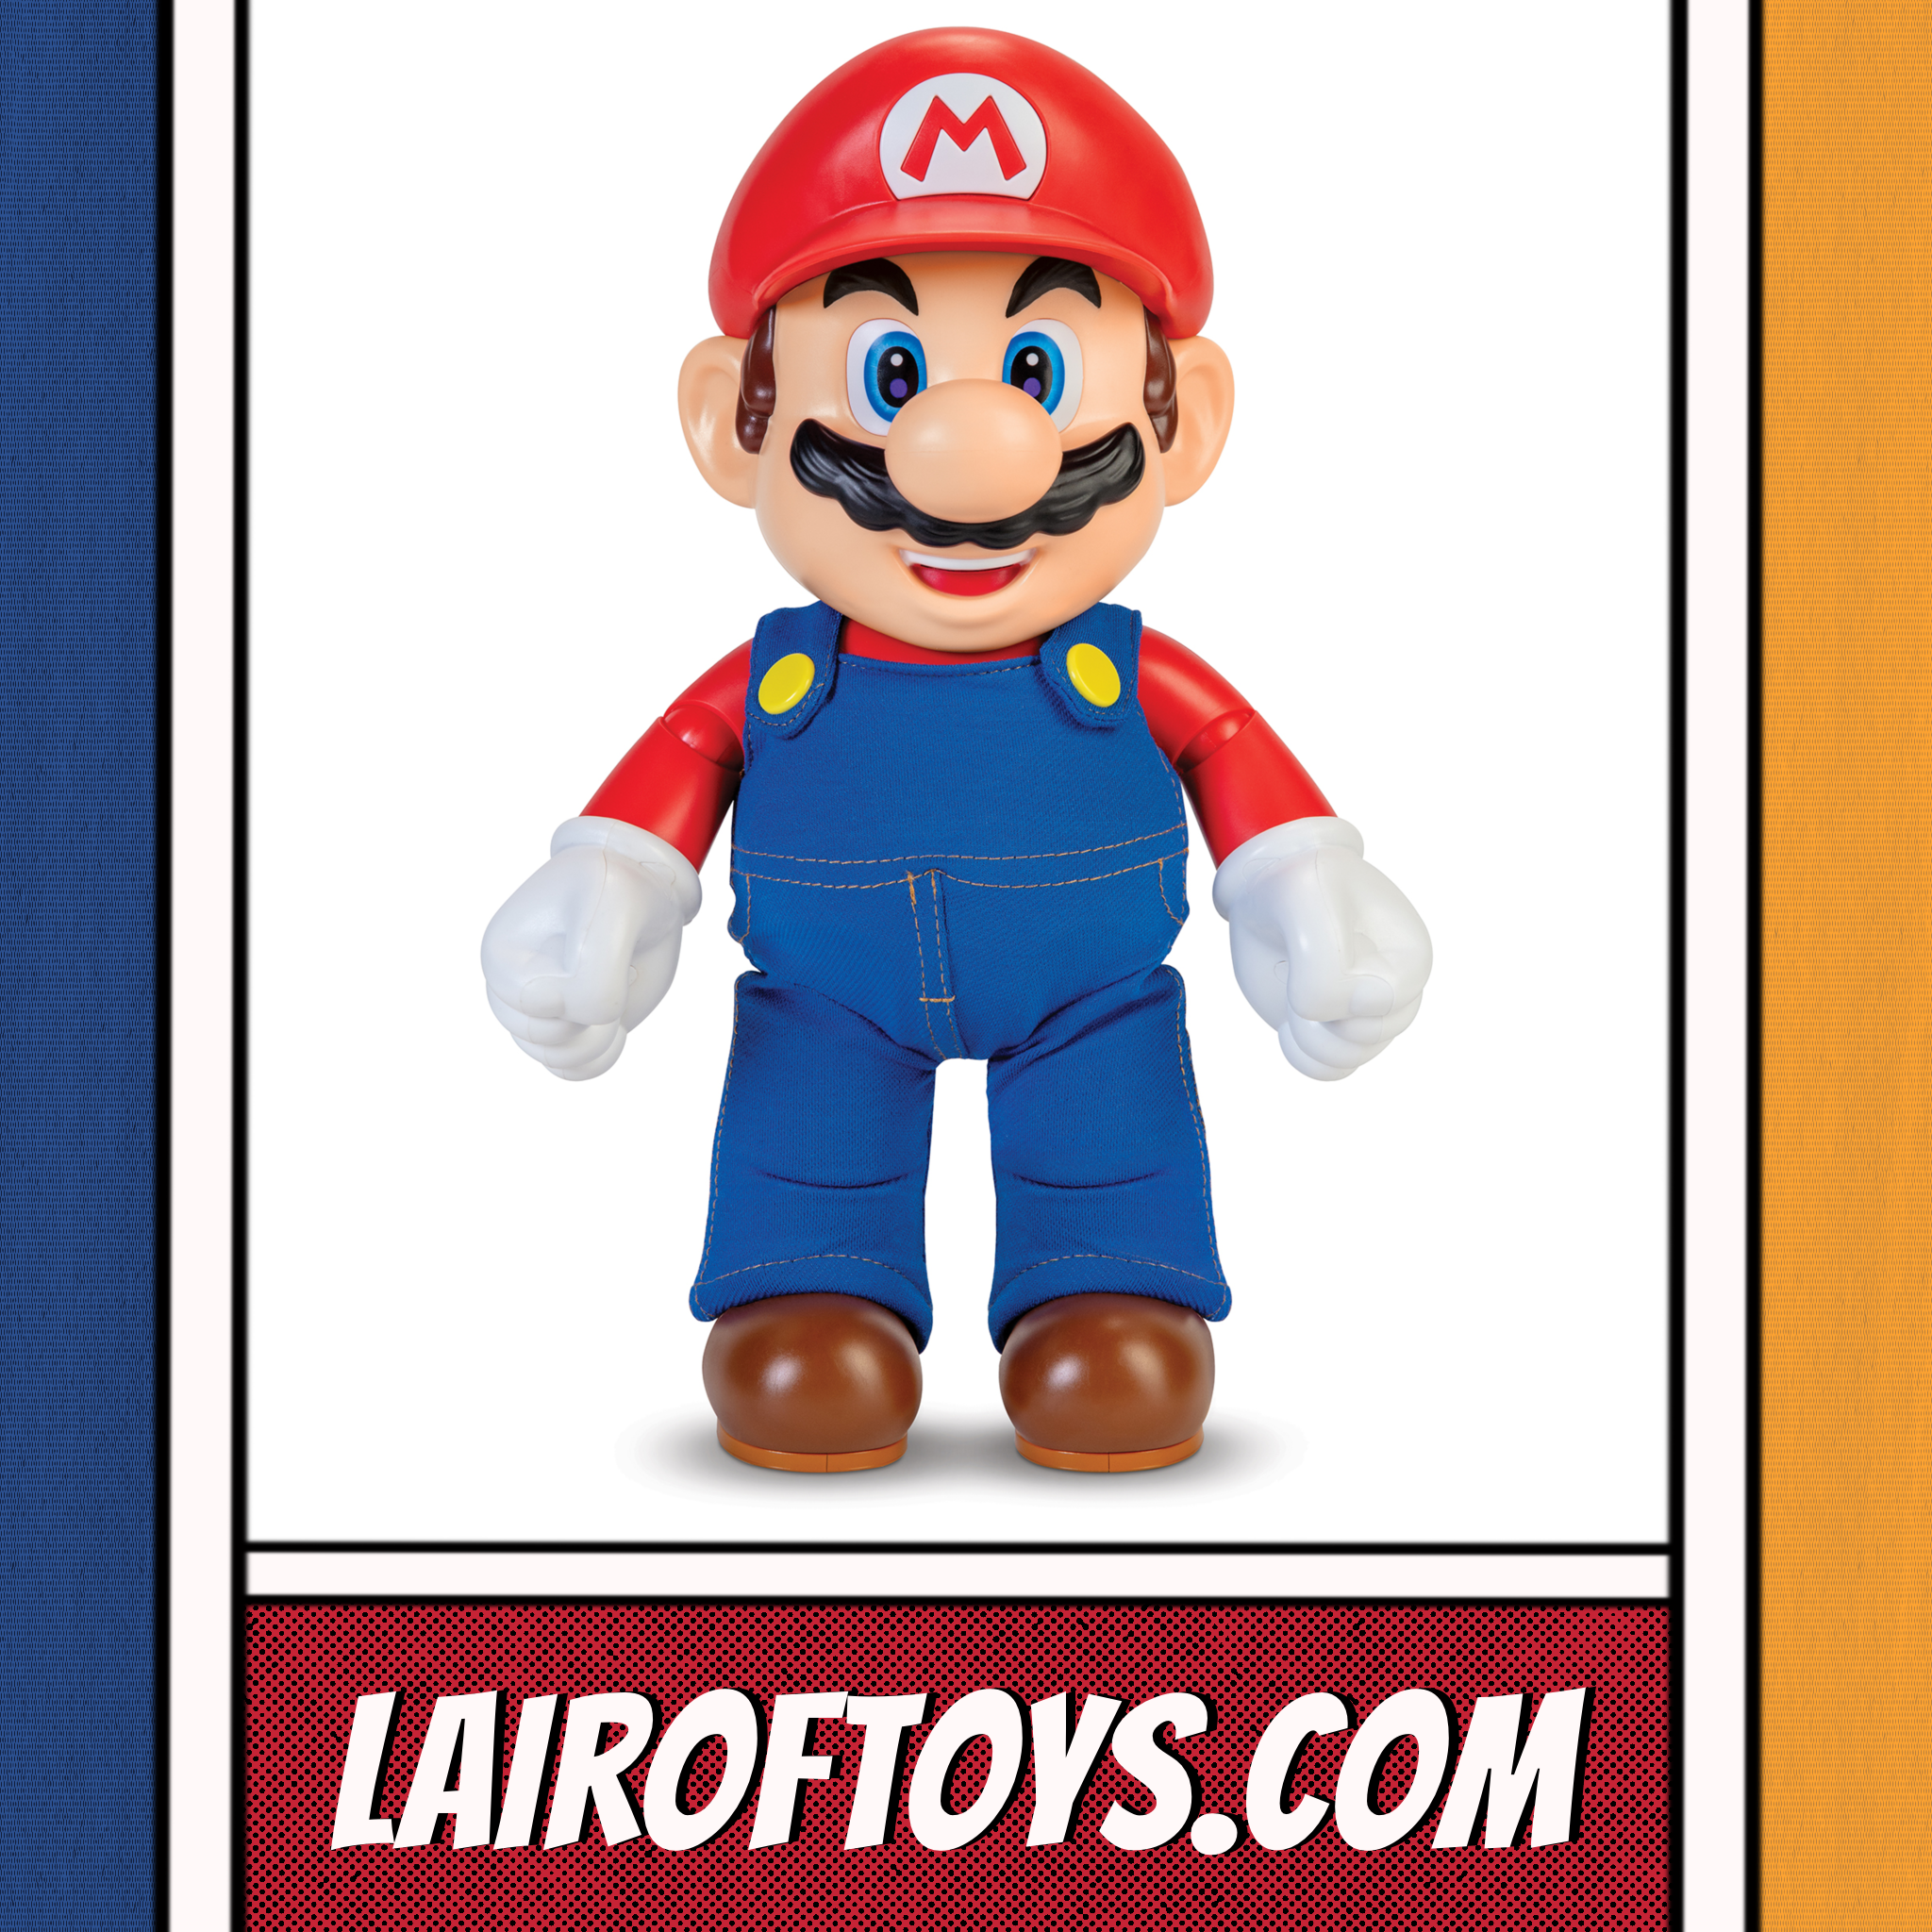 Nintendo It's-A Me! Mario Figure – The Lair of Toys